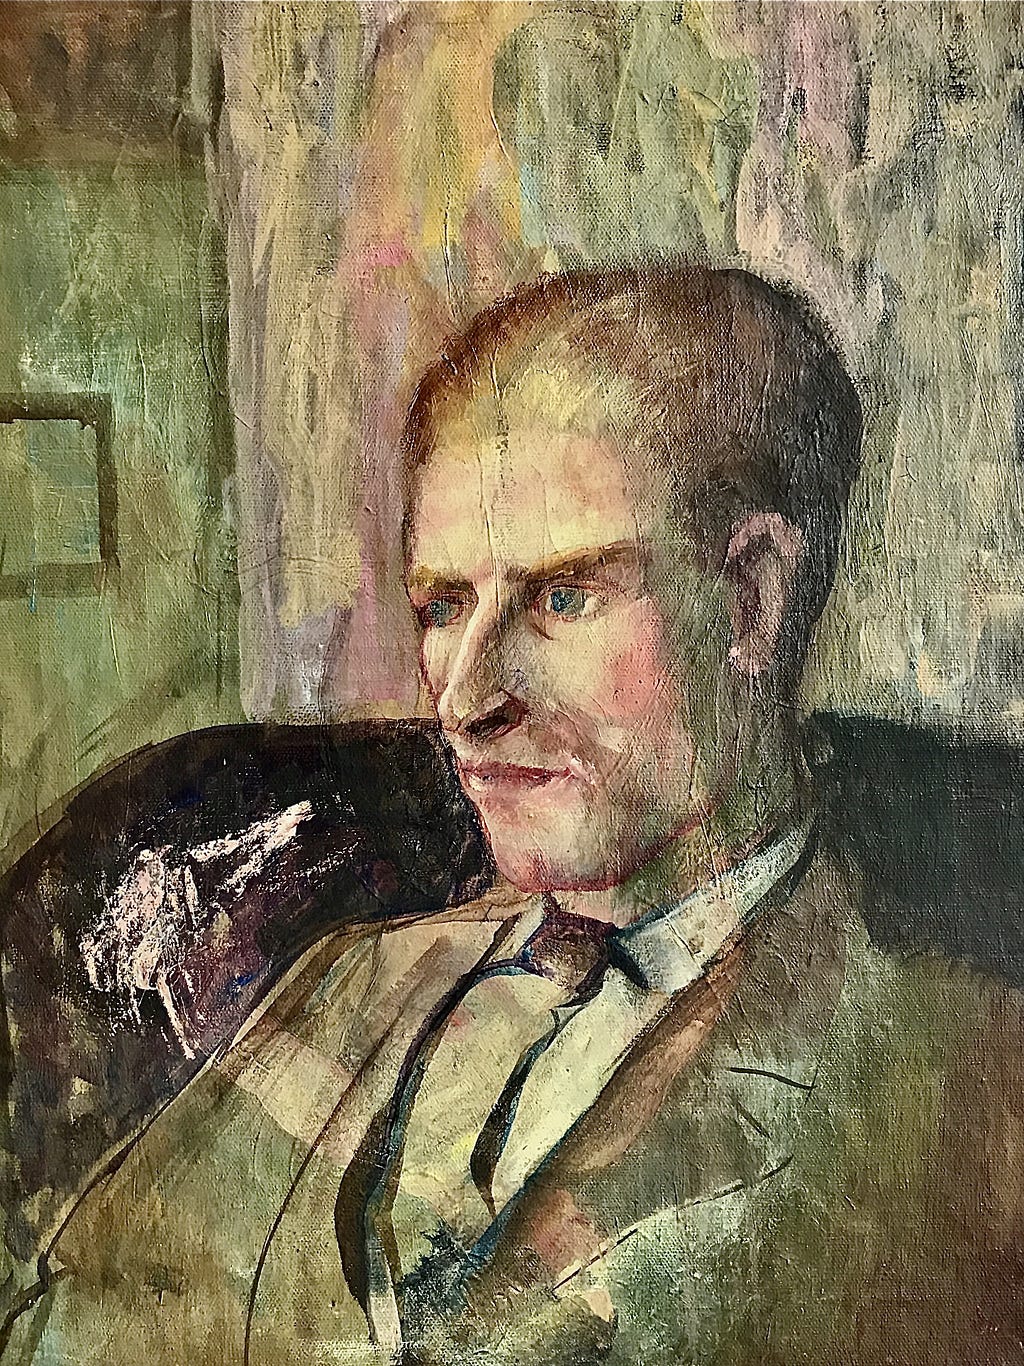 Mixed media primitive painting of an older man sitting in a lounge chair staring intently with a contemplative expression